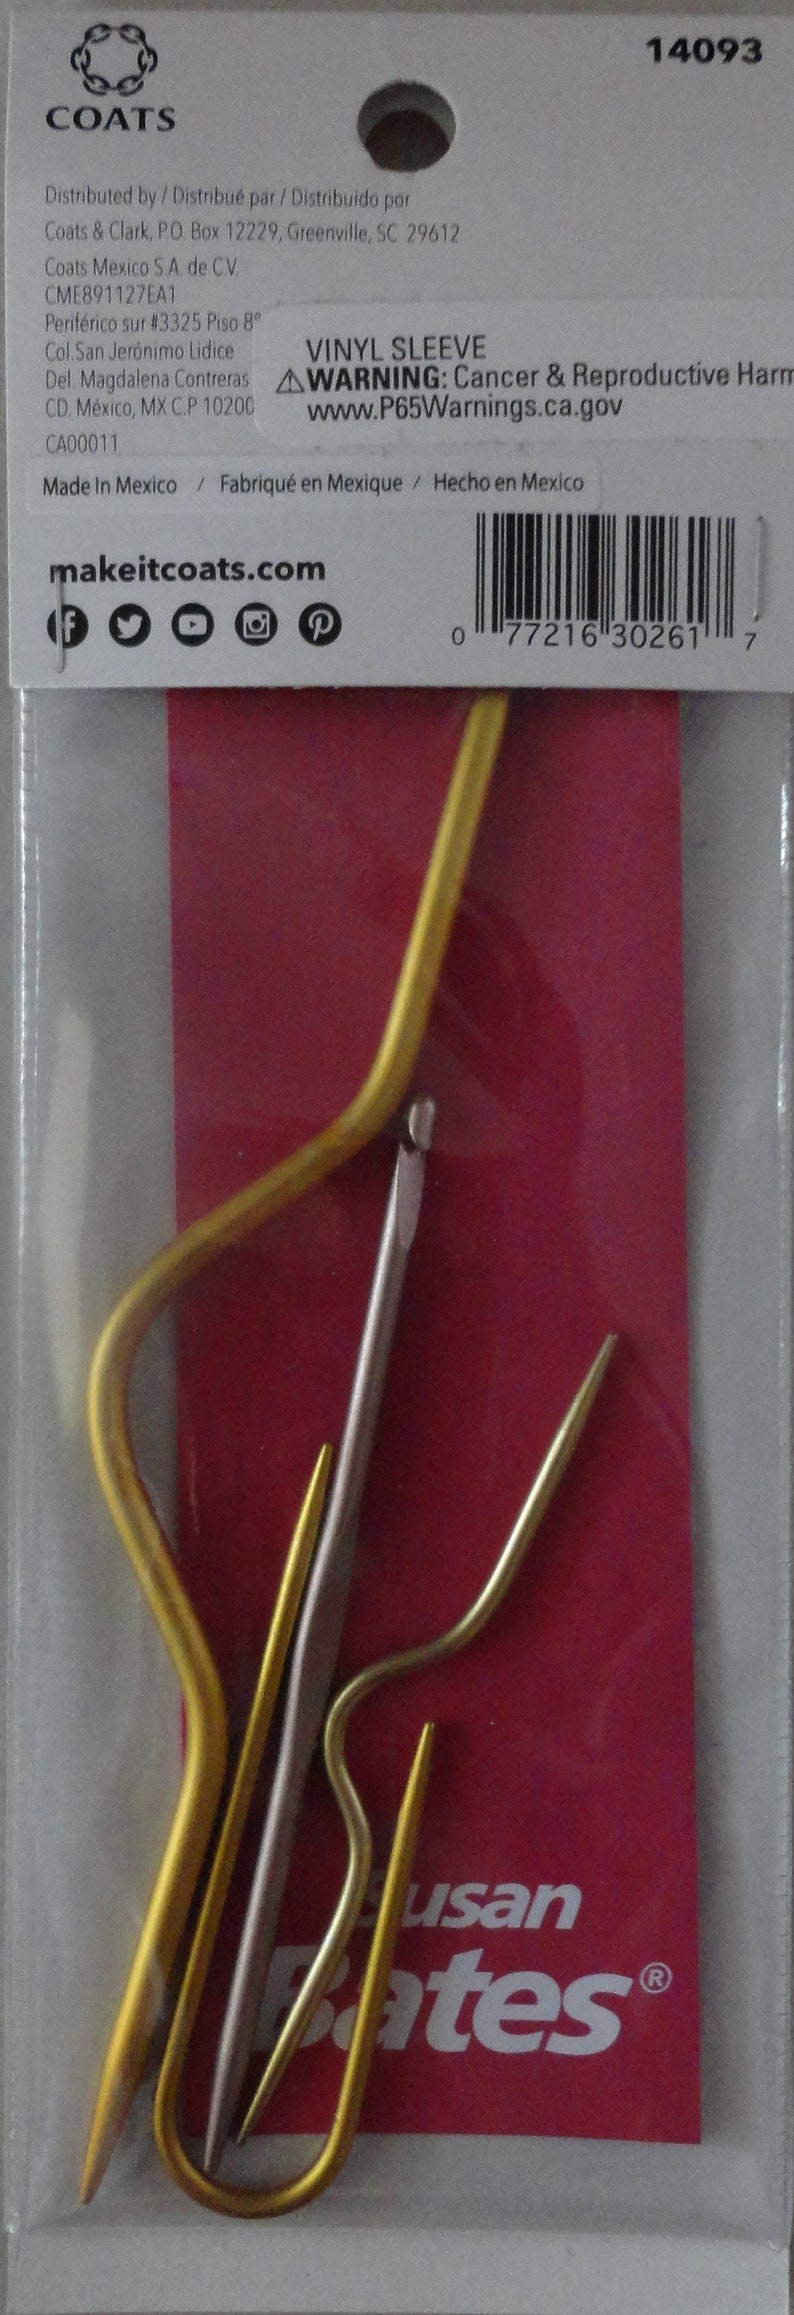 Susan Bates Accessories,Knit Chek,Stitch Holders,Yarn Needles,Yarn Essential Kit,Cable Stitch Holders/Hand Tool,Pom Pom Maker,French Knitter Cable Needle Set